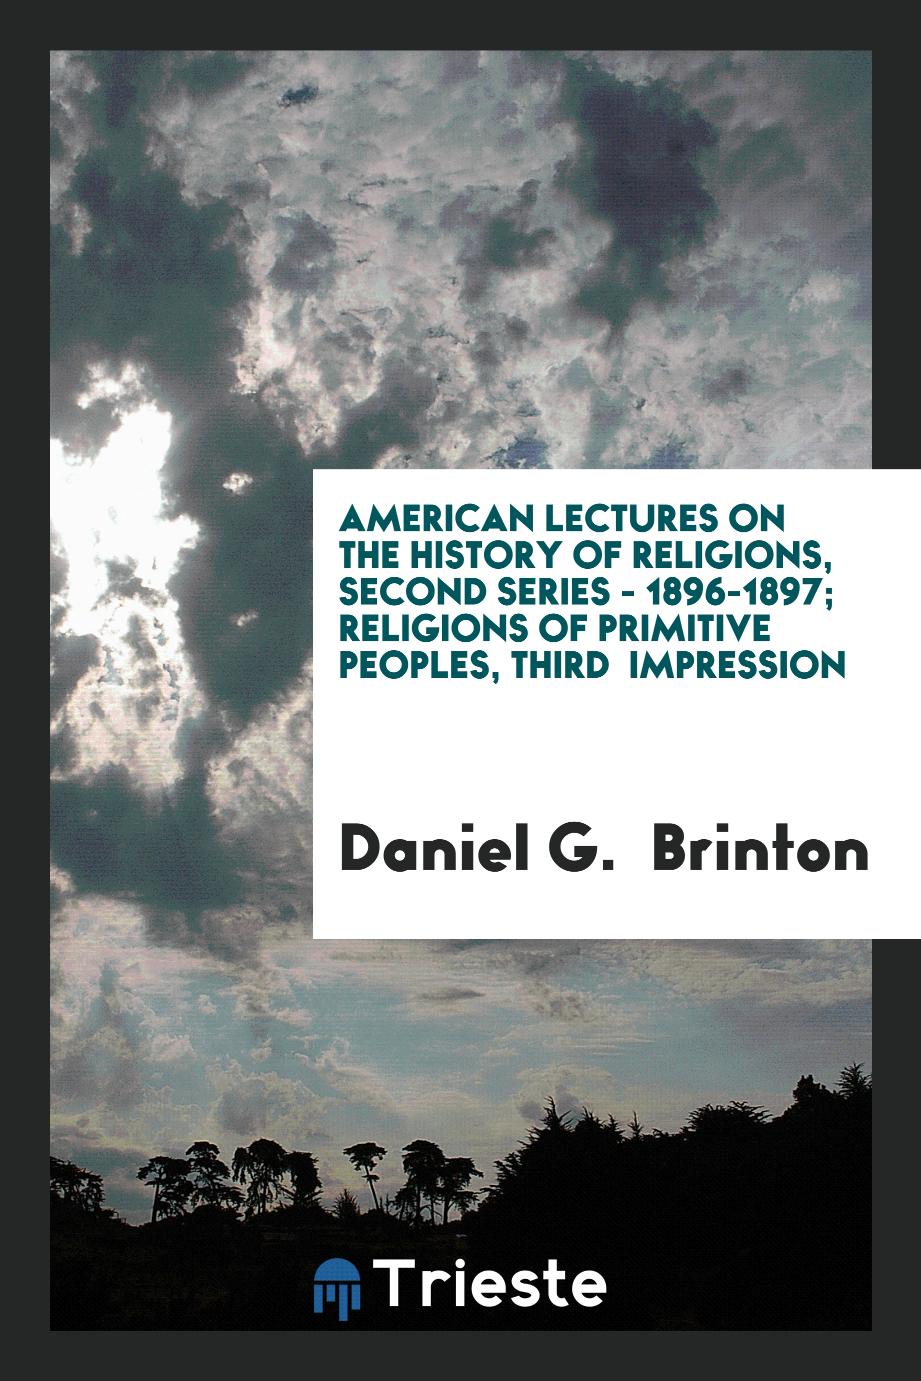 American lectures on the history of religions, second series - 1896-1897; Religions of primitive peoples, Third impression